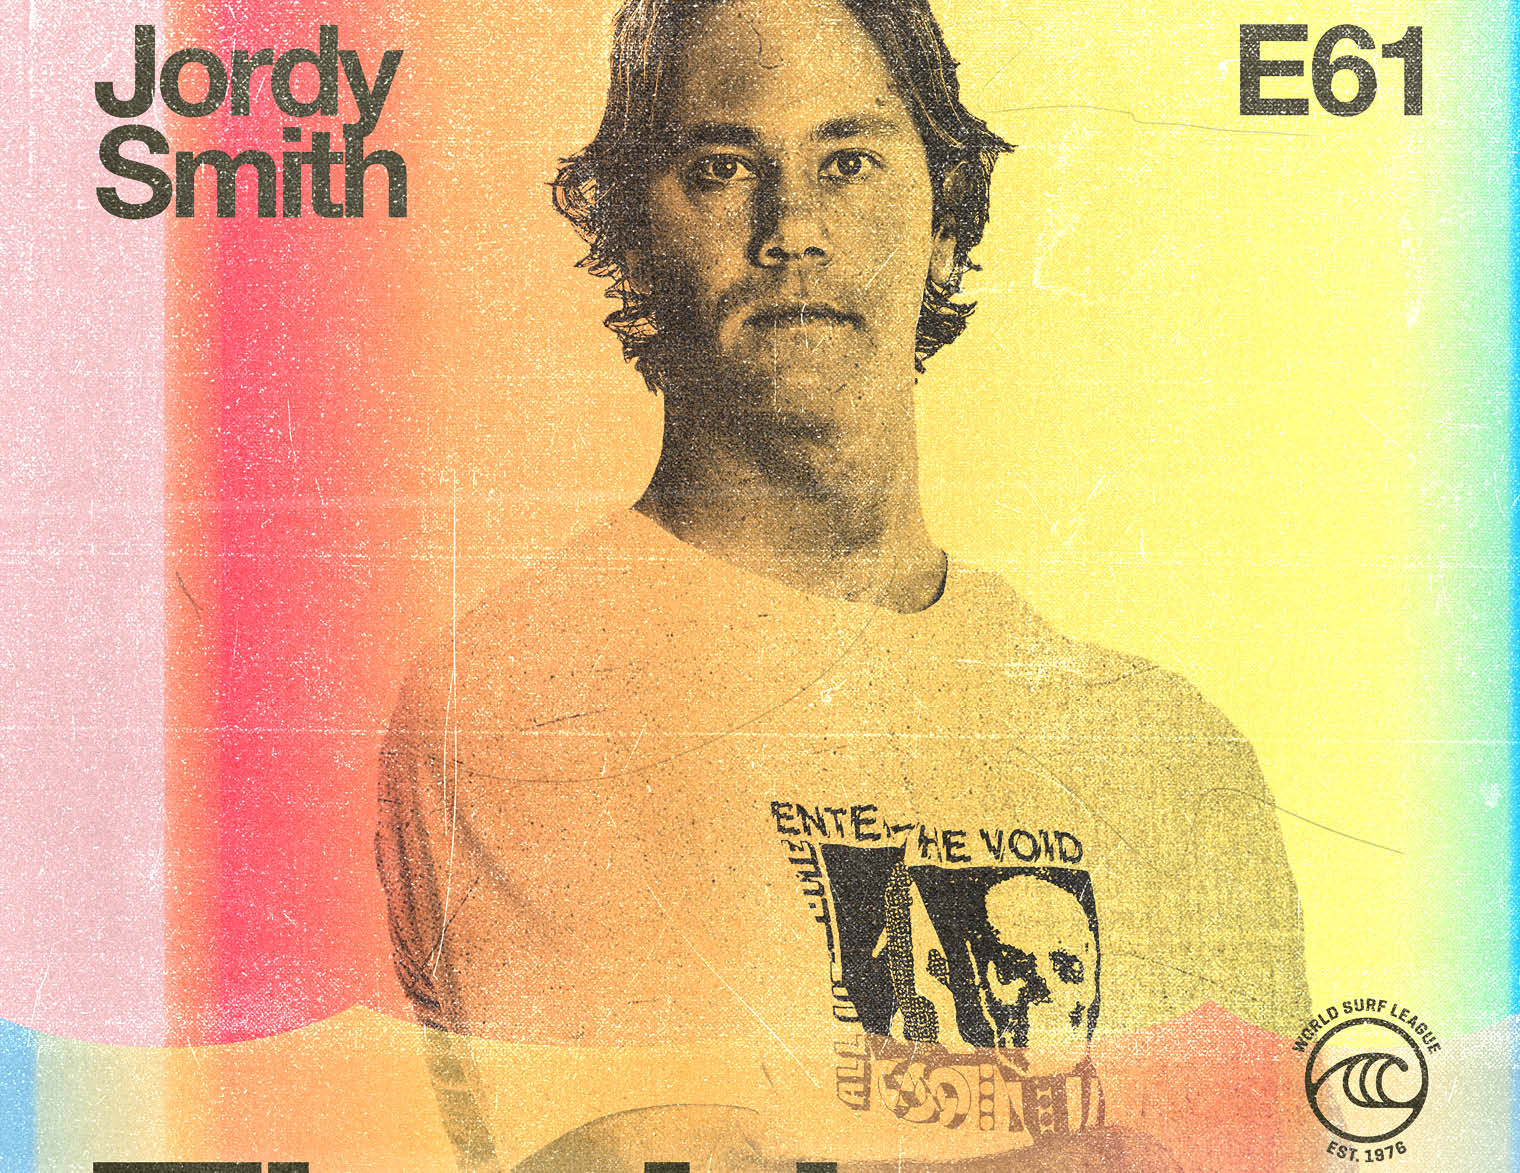 LISTEN: JORDY SMITH ON 'THE LINEUP'